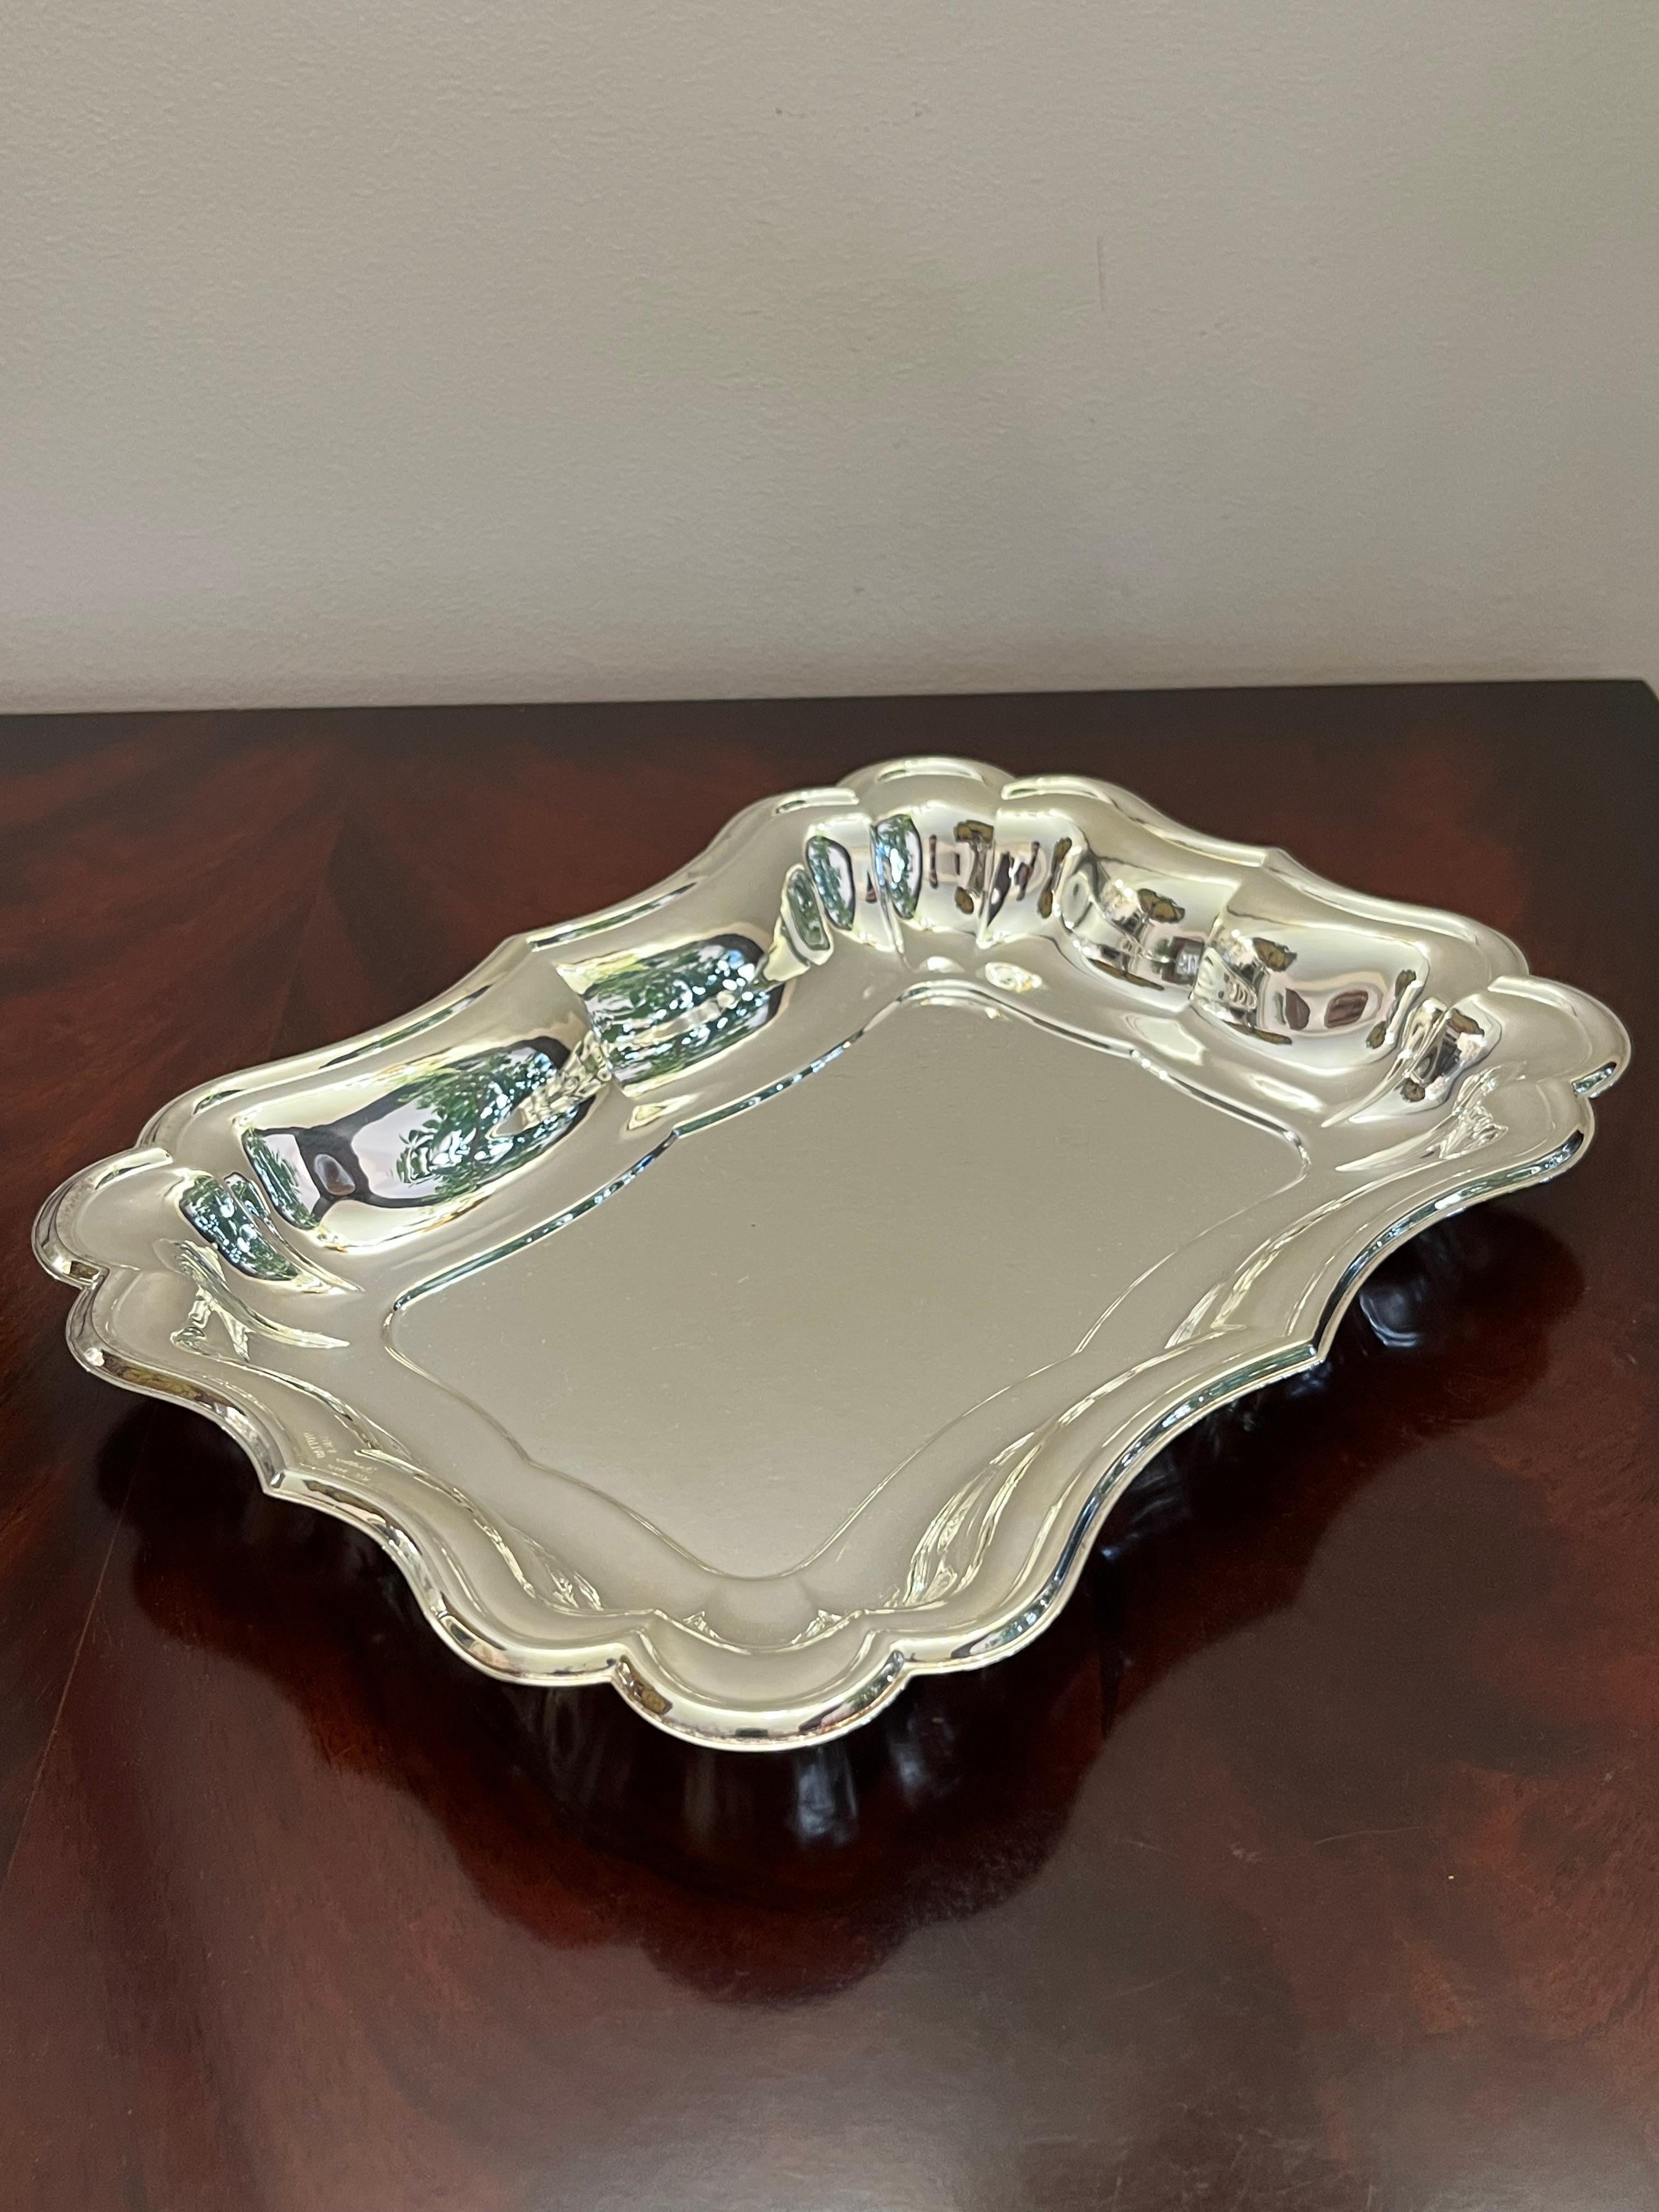 800 silver coin tray, Italy, Argenteria Greggio, 1980s
Worked and beaten by hand, it is a very beautiful and elegant object. It weighs gr. 270. Regularly stamped with state marks certifying the fineness of the silver and the producer. Small signs of